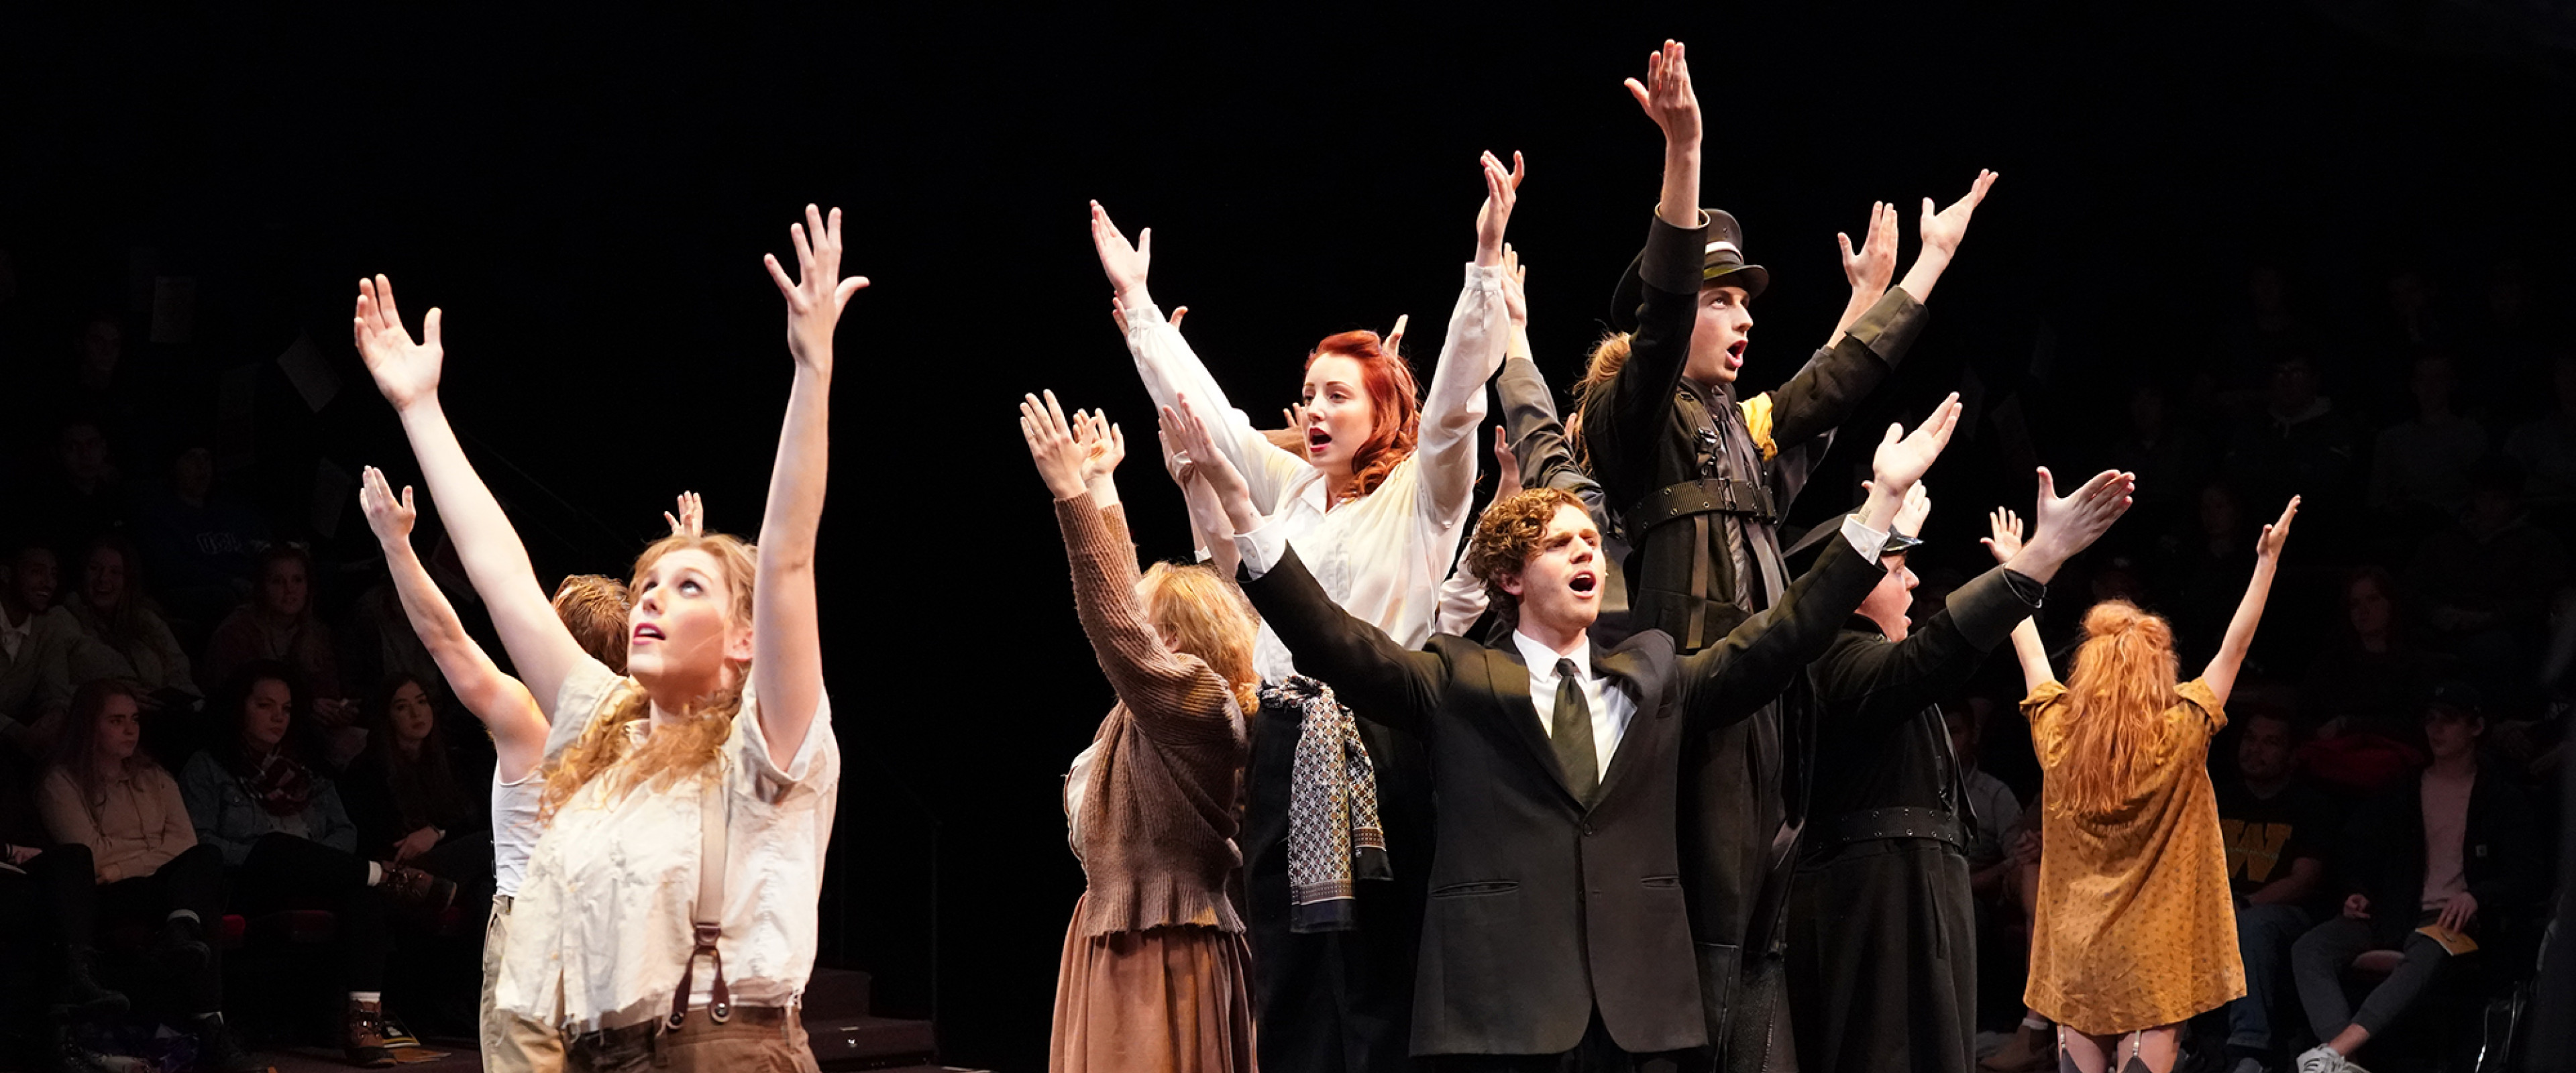 Urinetown: The Musical performance.